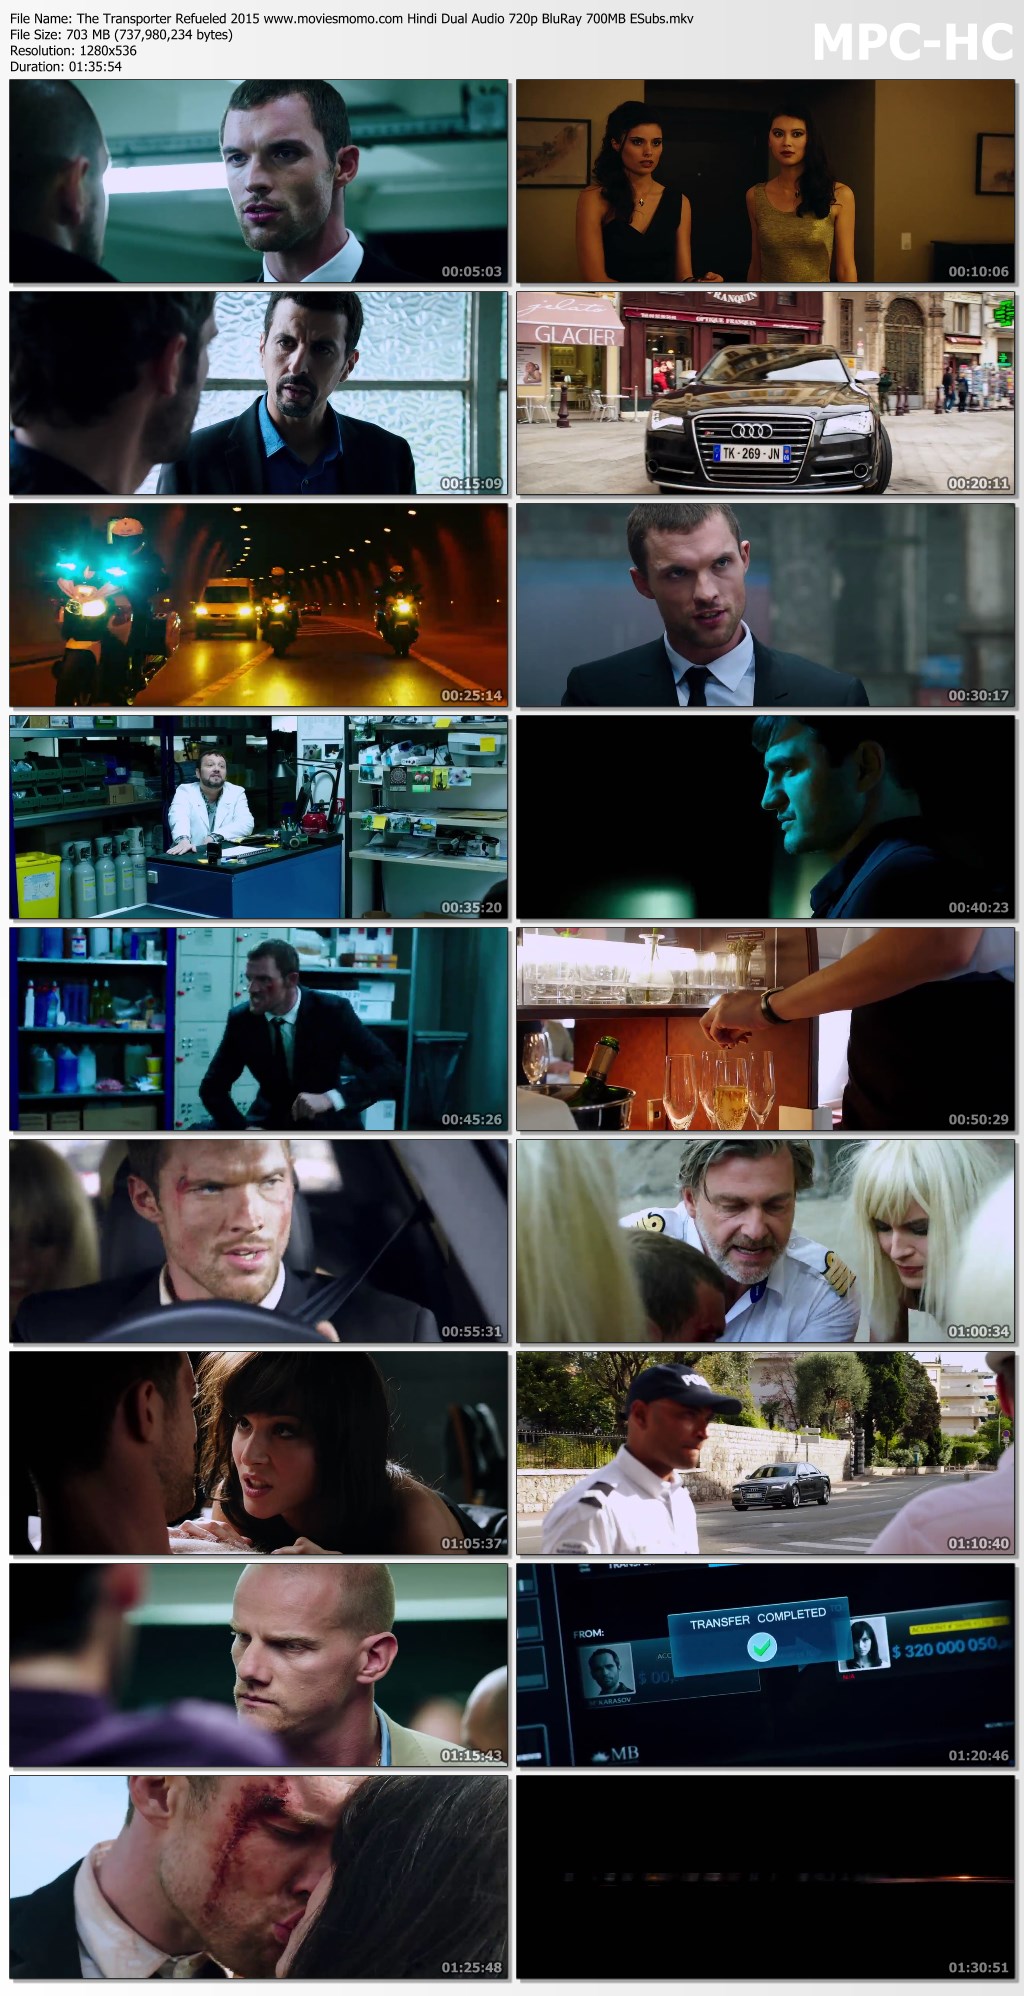 the transporter 4 refueled 2015 dvd release